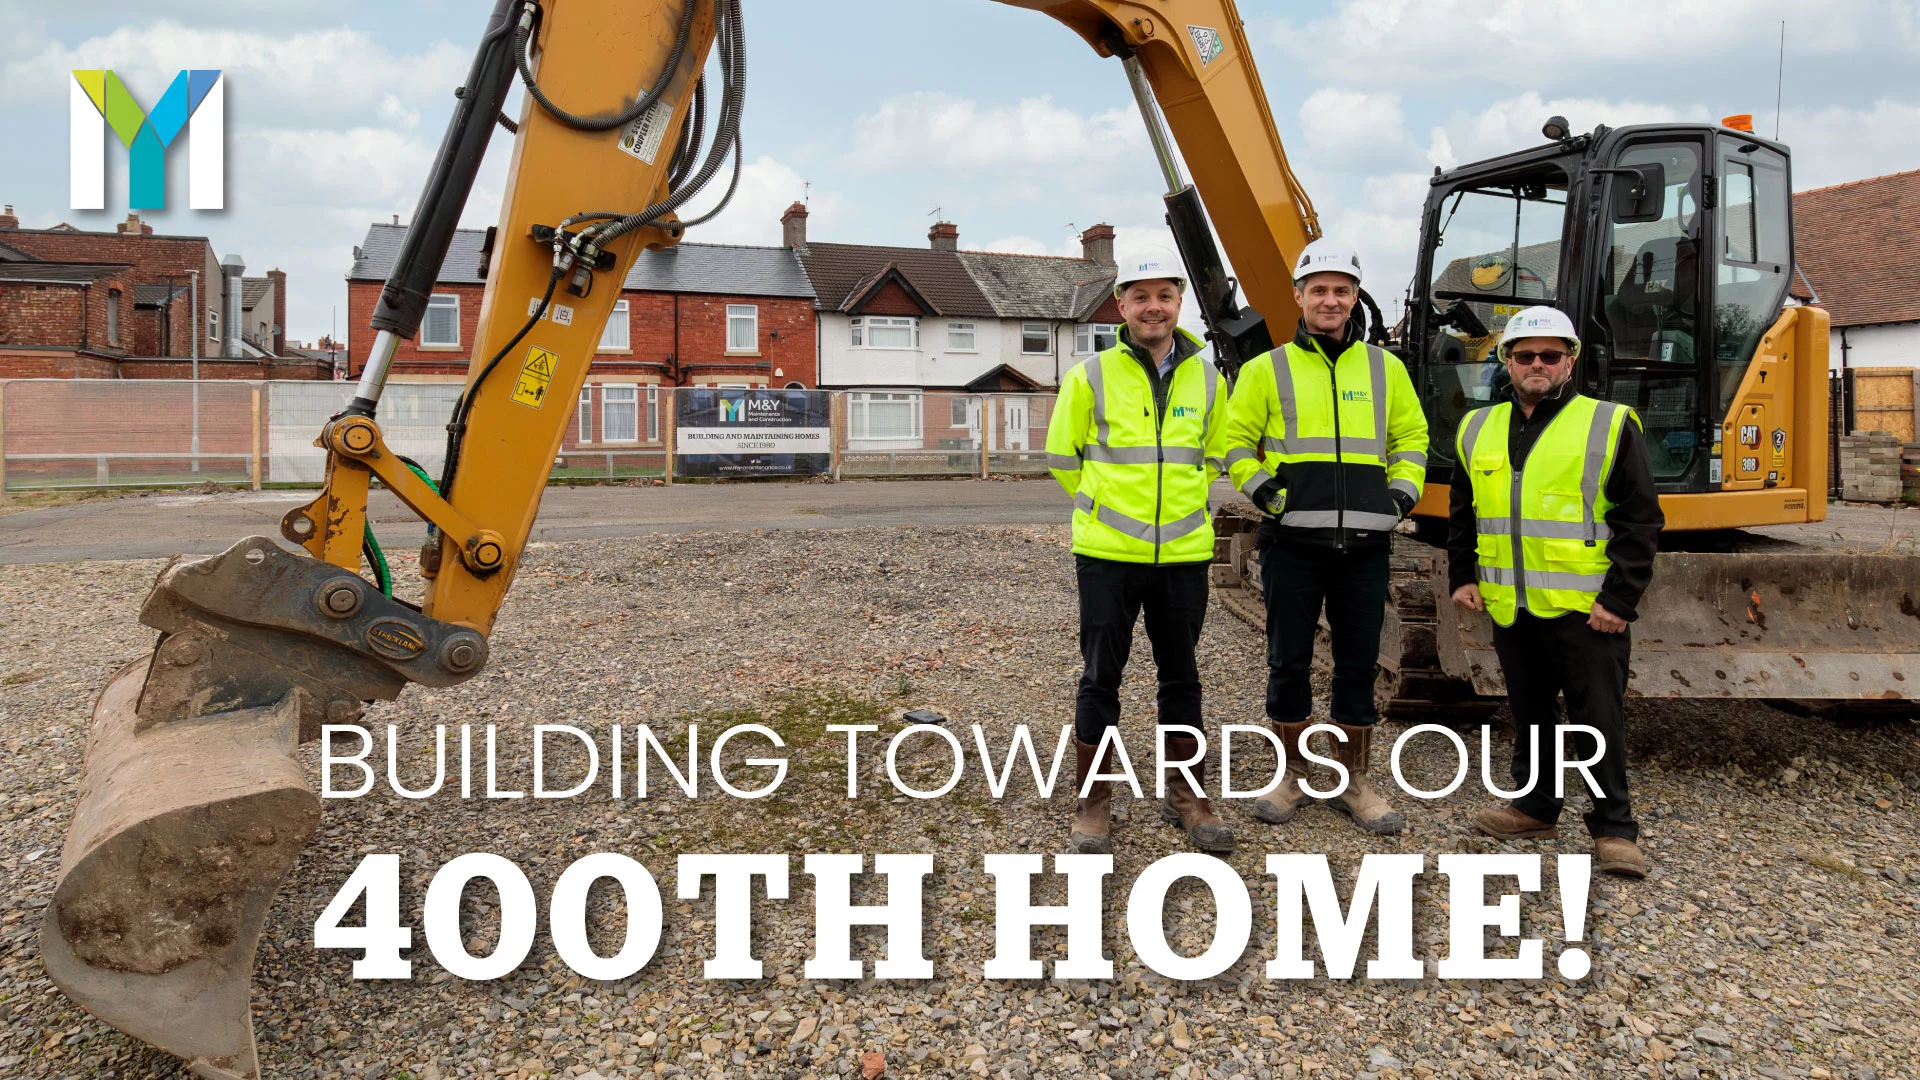 image shows row of houses in background with digger in foreground with three M&Y staff members in high vis' and hard hats. Text over image reads 'building towards our 400th home!'